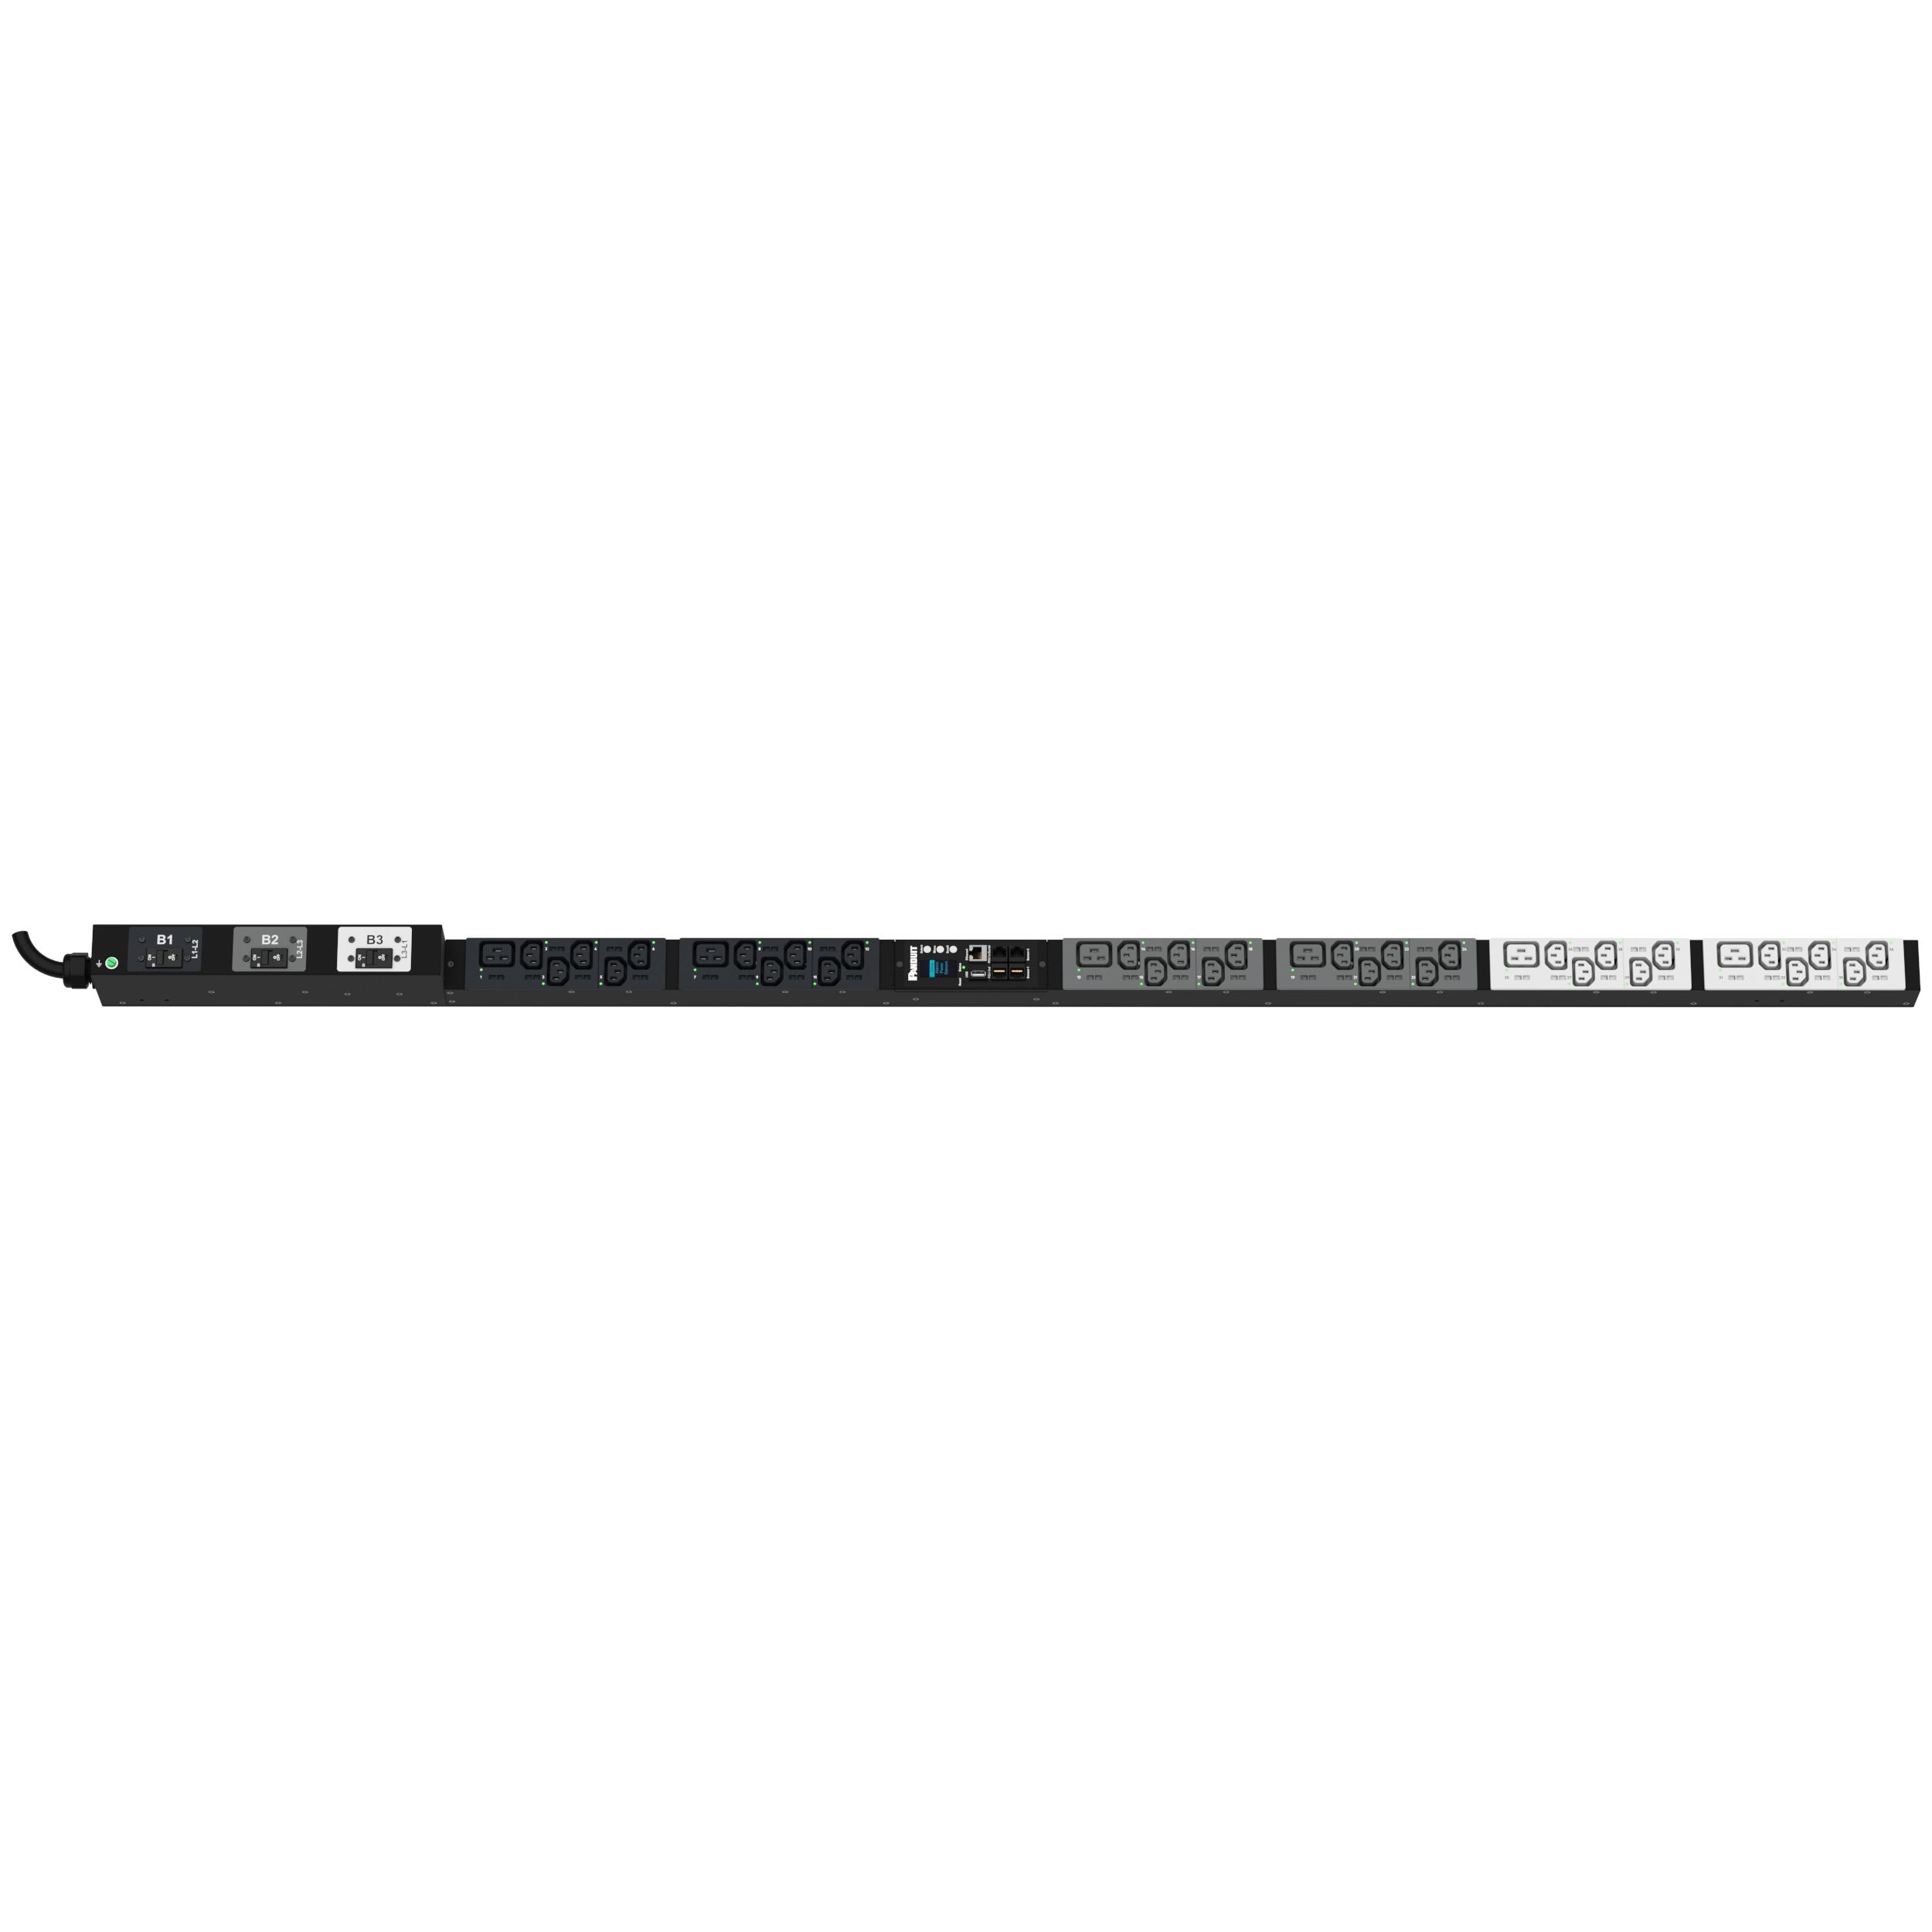 Panduit P36G22M SmartZone™ Monitored & Switched per Outlet PDU